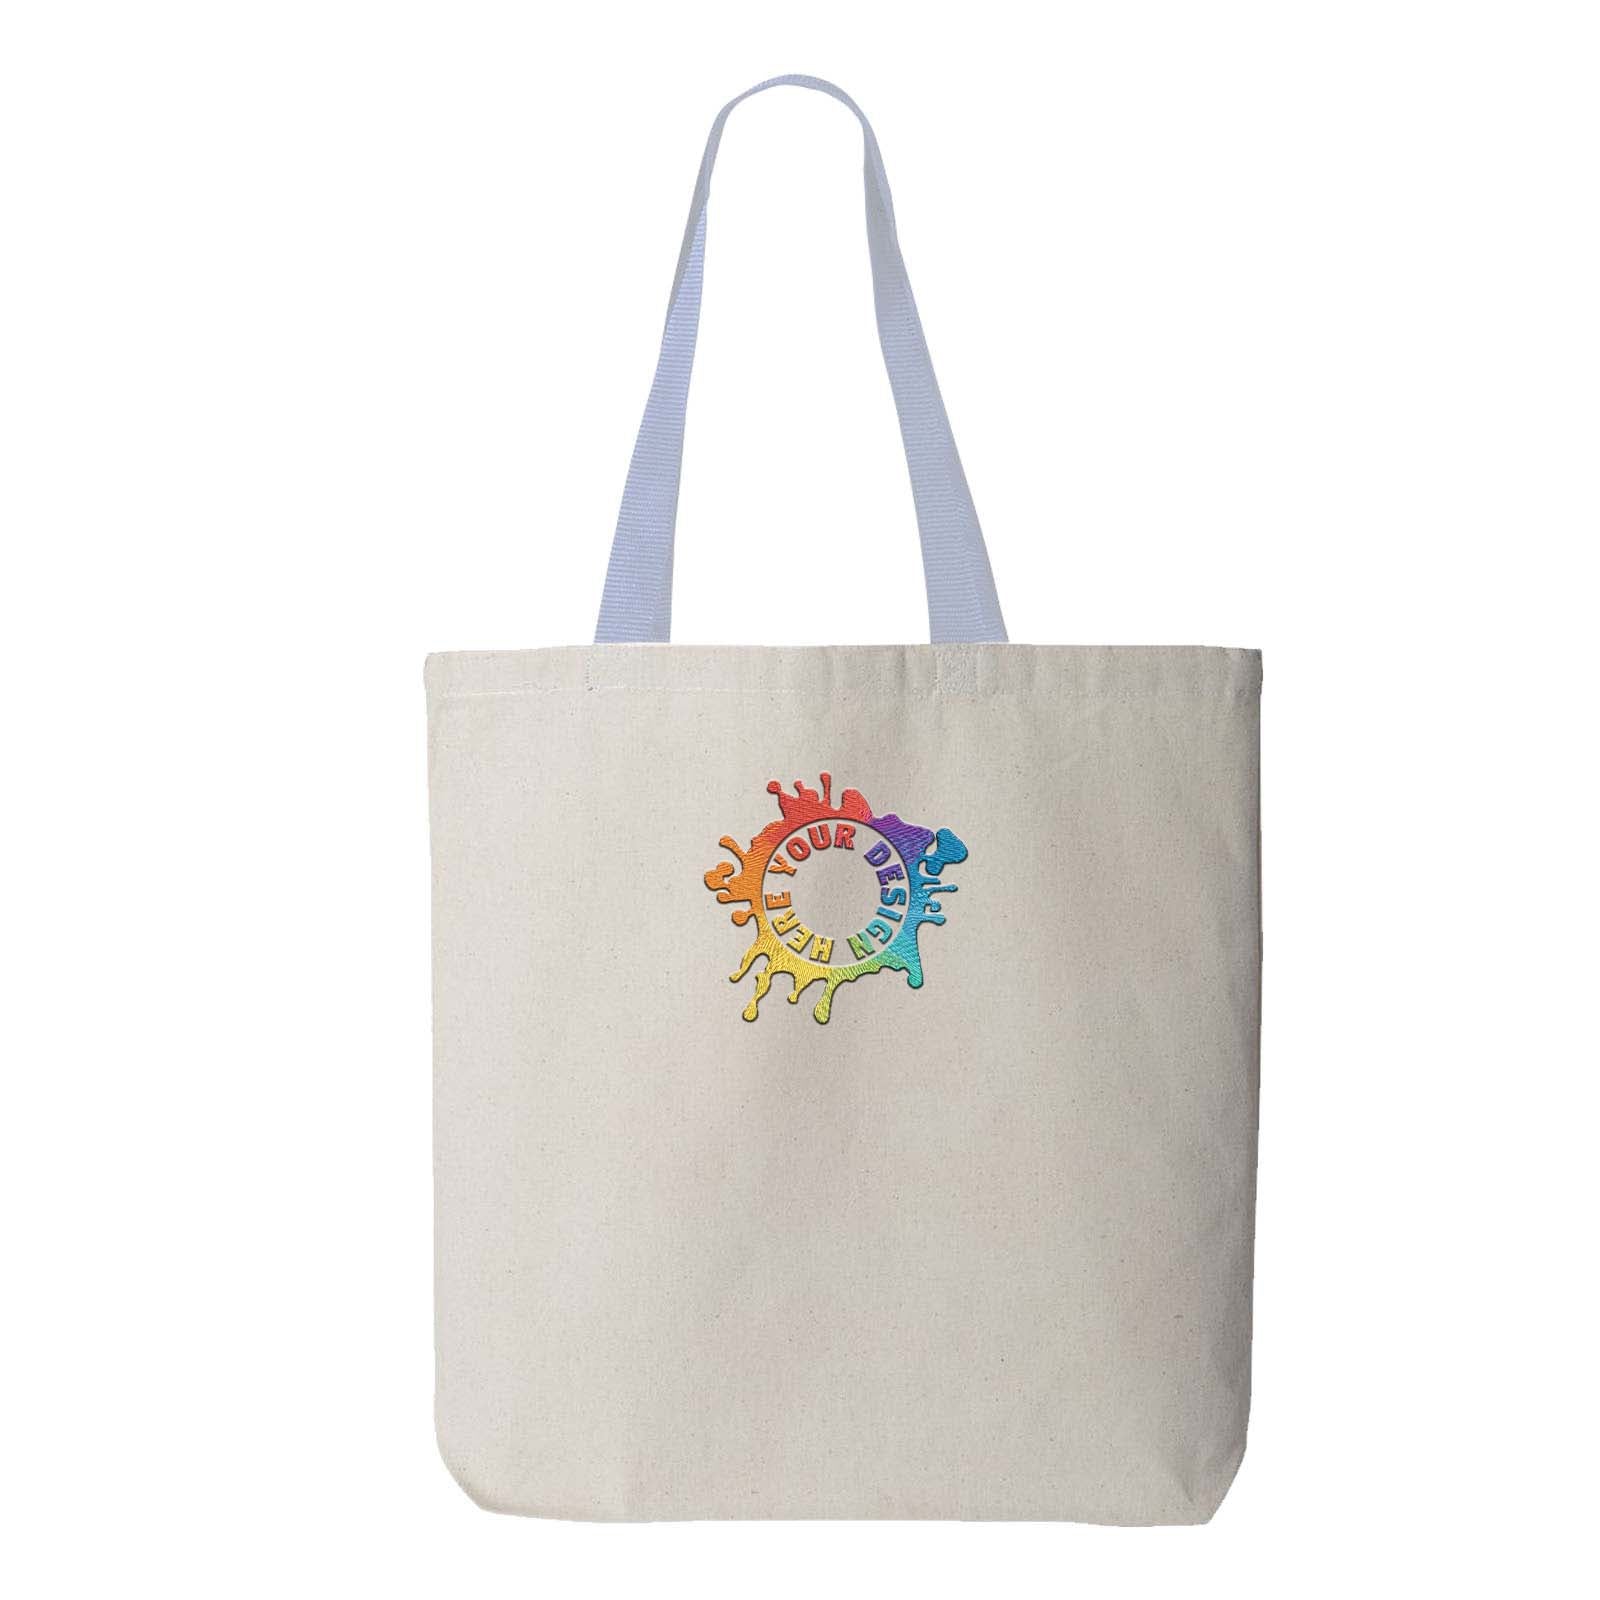 Q-Tees 11L Canvas Tote with Contrast-Color Handles Embroidery - Mato & Hash